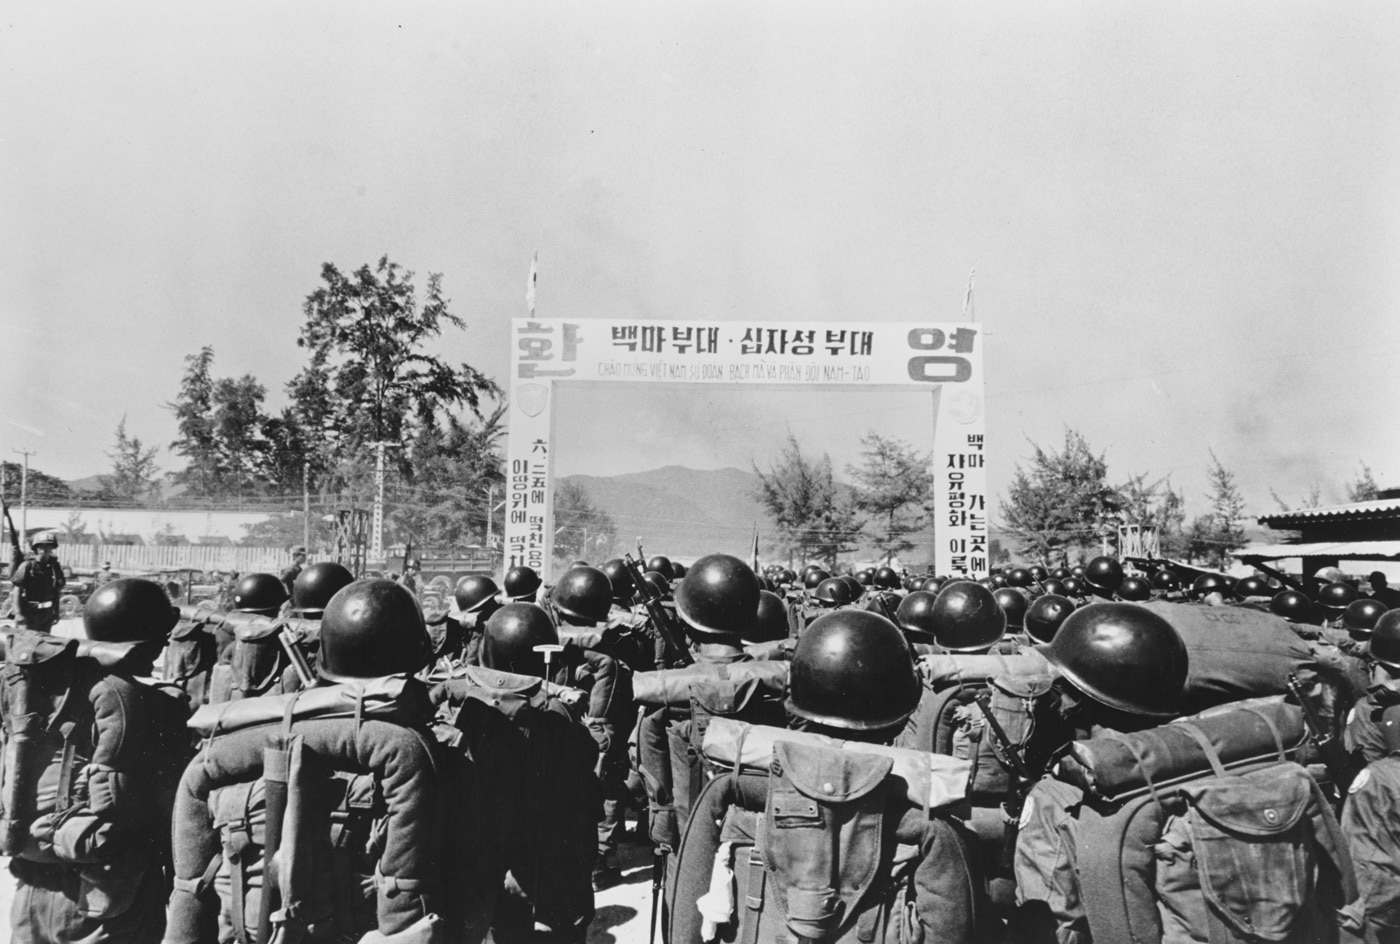 The image documents the arrival of the Korean Army's 9th Division in South Vietnam. The 5,500 Koreans were an important part of the ground war in southern Vietnam along the coast in the areas of NHA Trang, Tuy Hao and Cam Ranh.